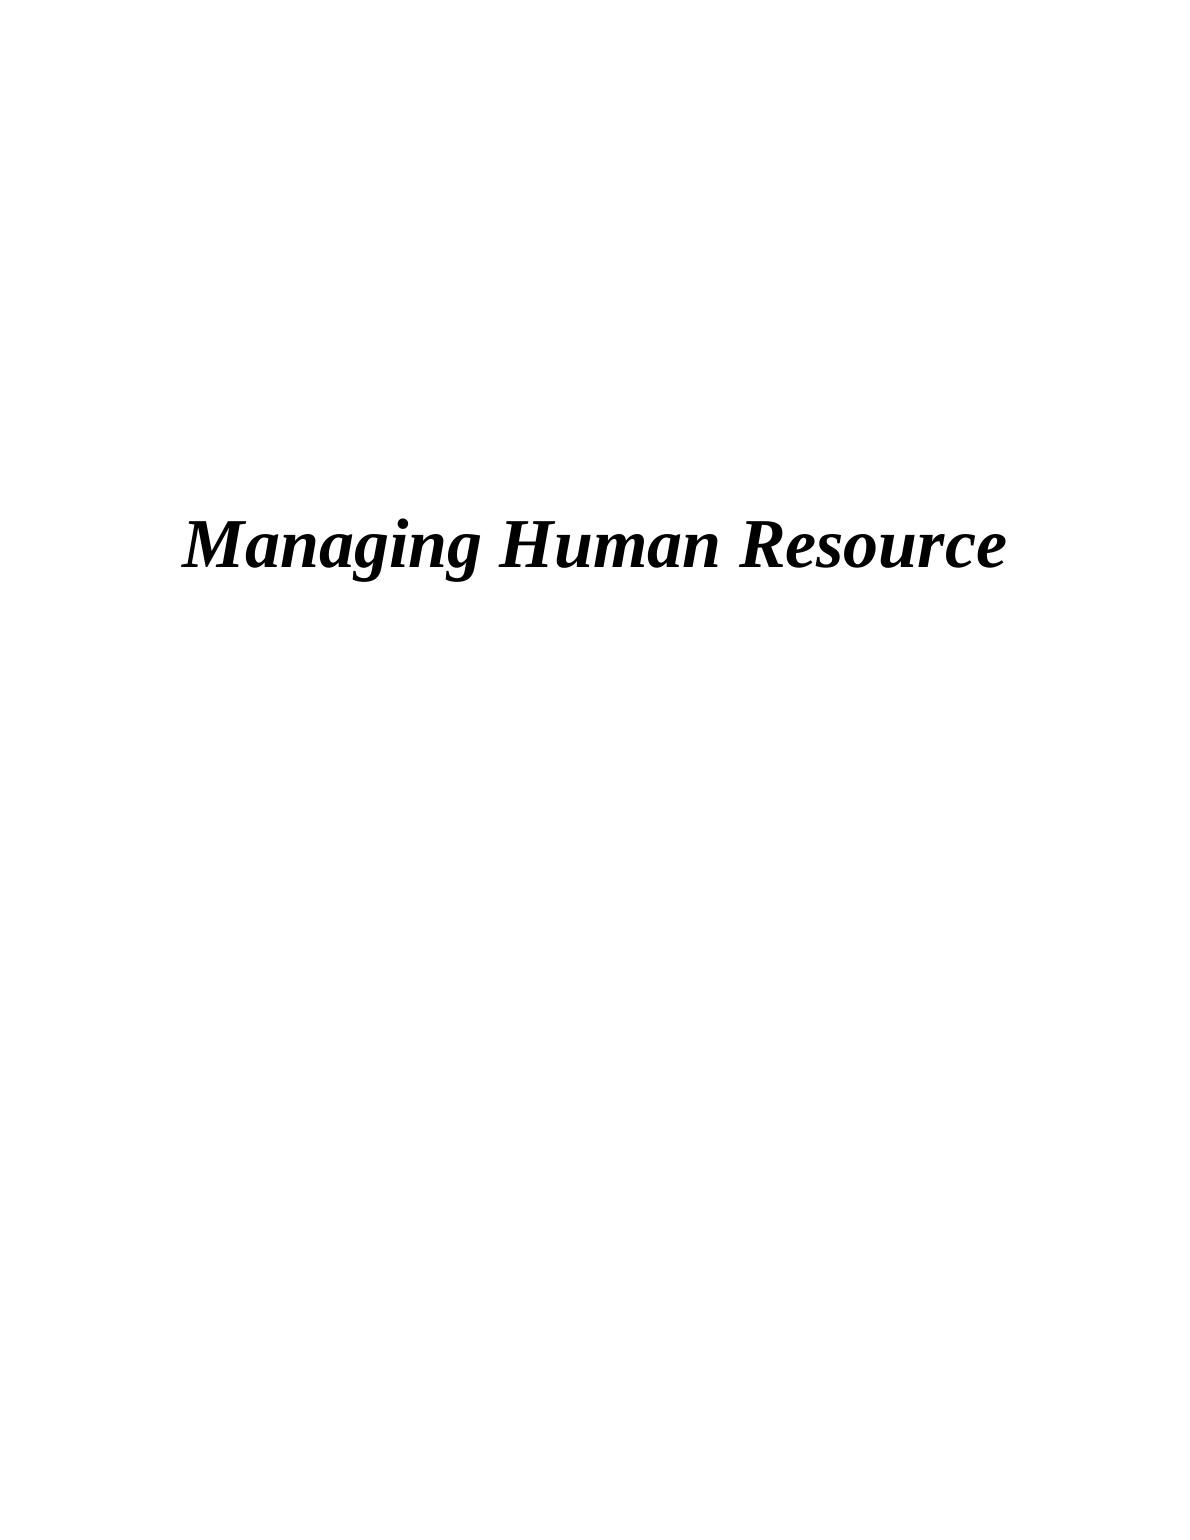 Managing human resources : assignment Sample_1